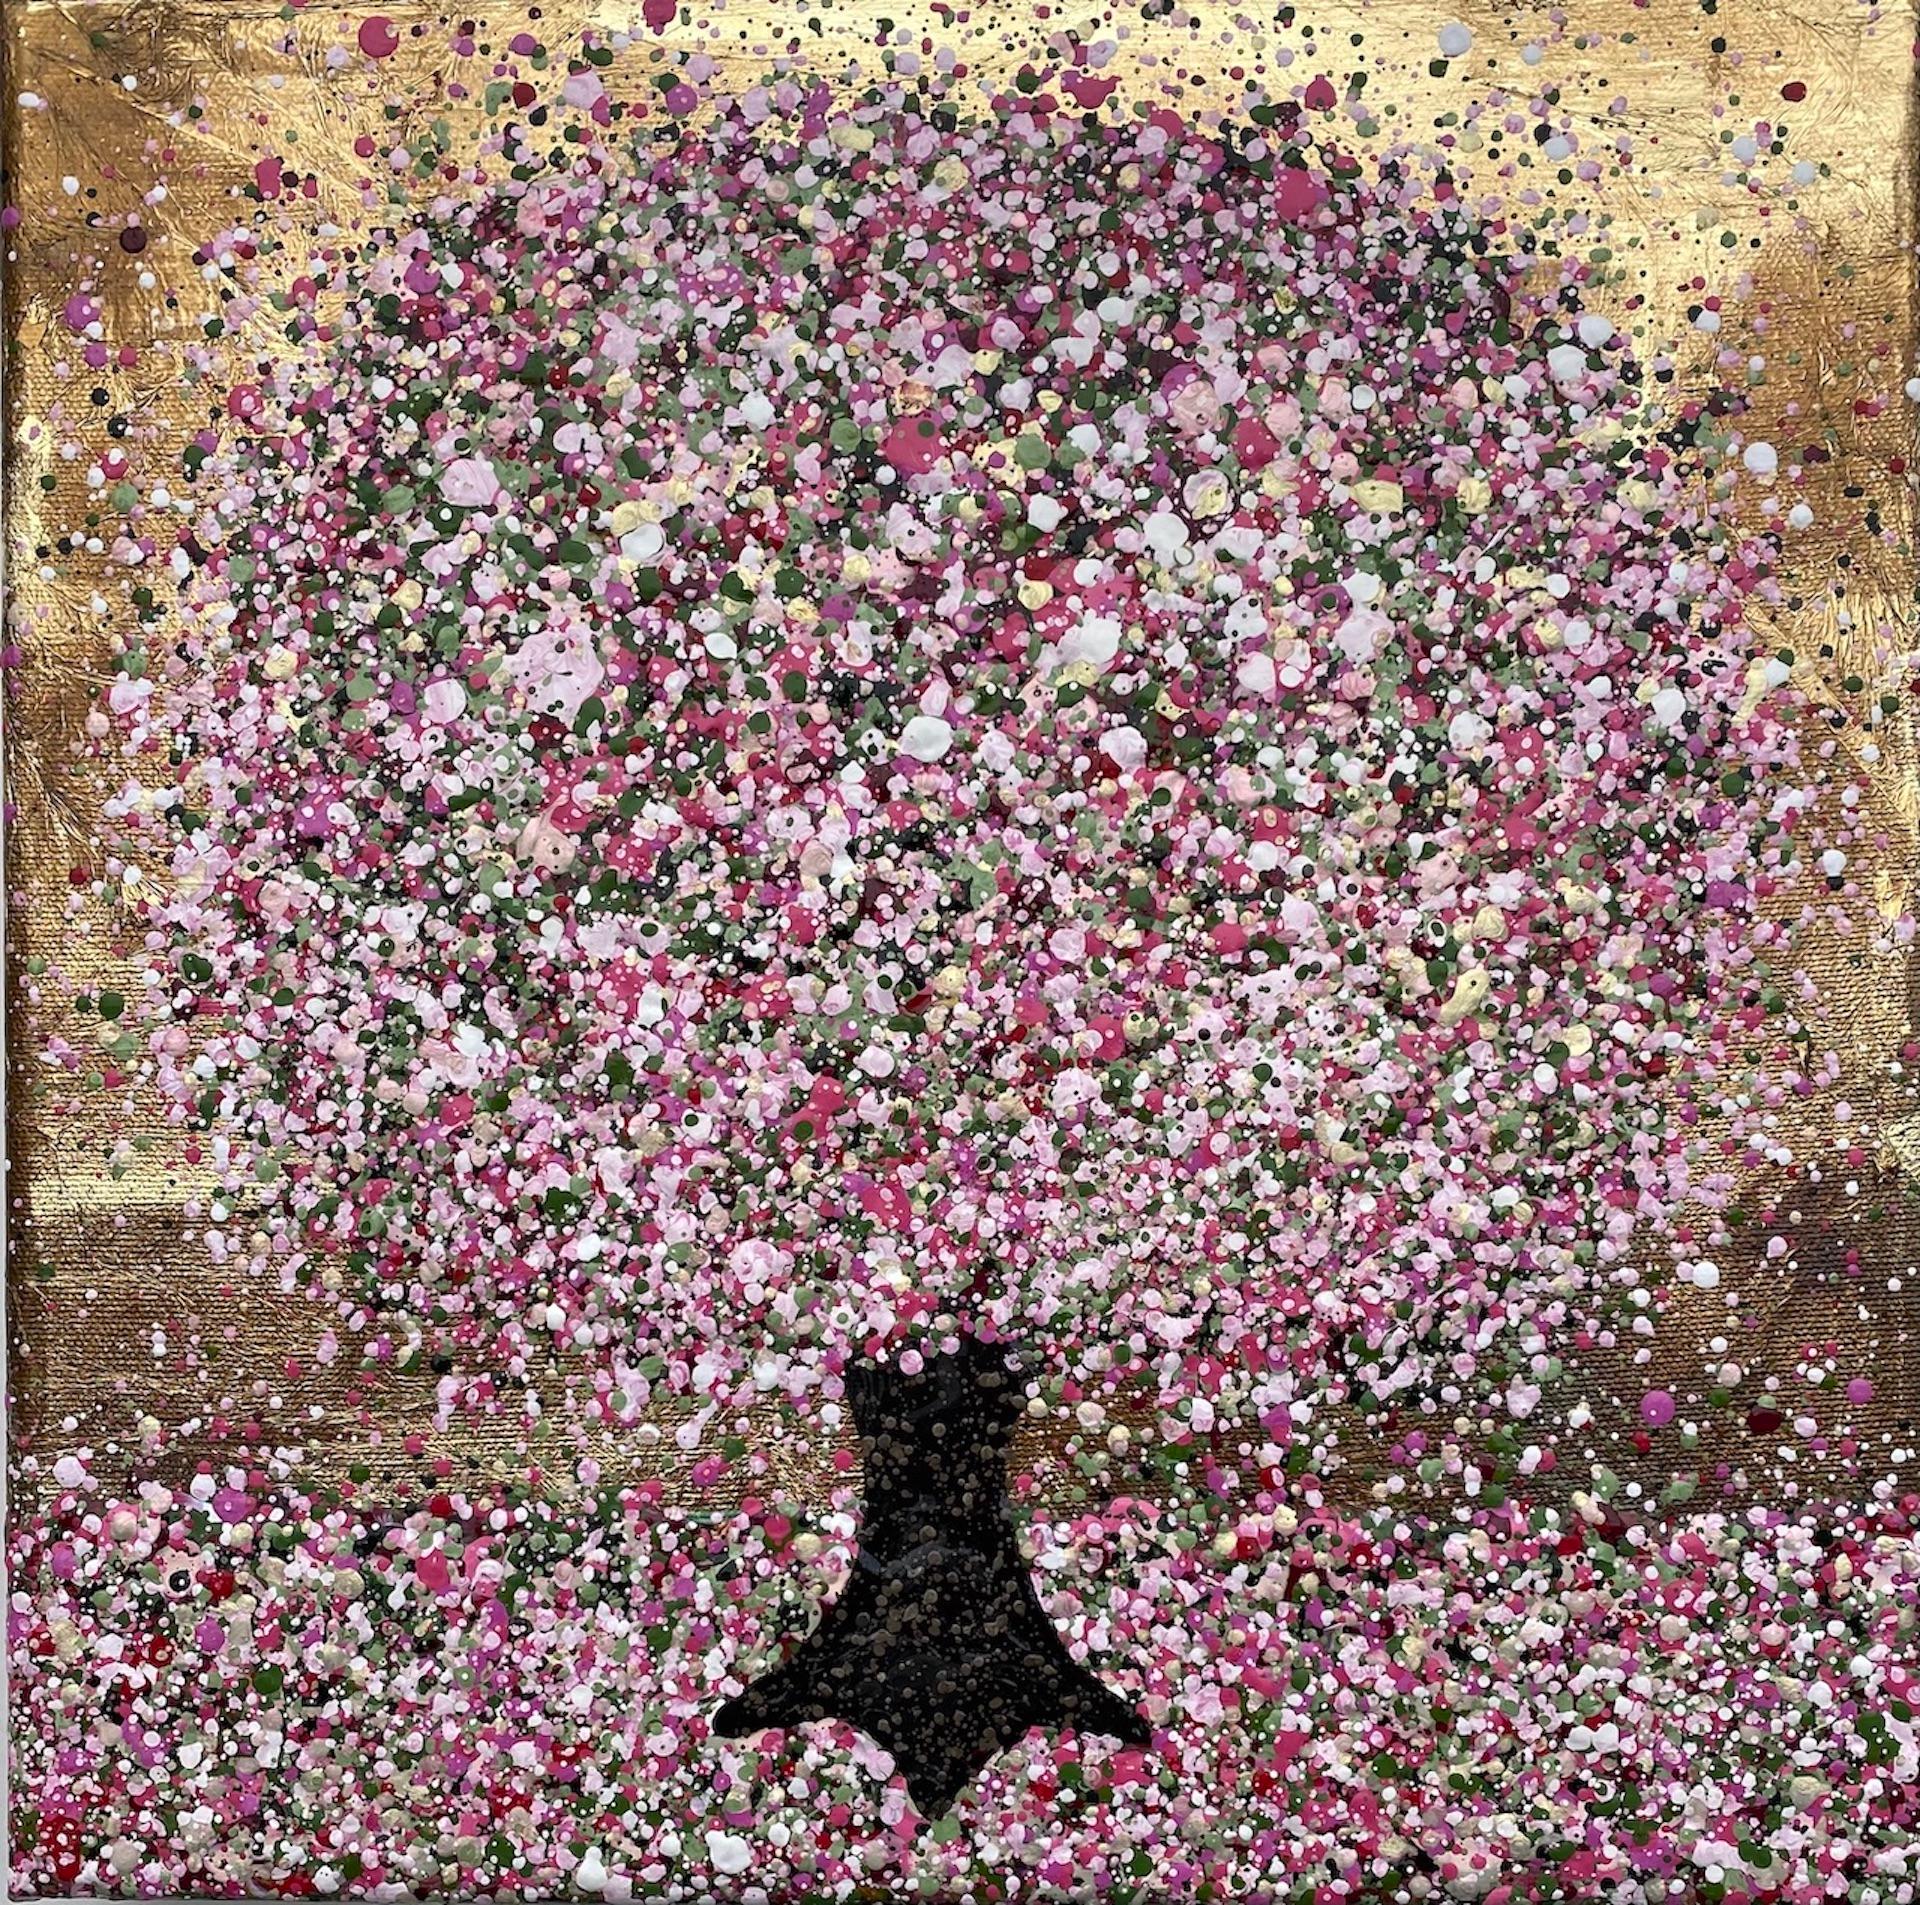 Everlasting Cherry Blossom II [2021]
Original
Landscape
Acrylic on Canvas
Size: H:30 cm x W:30 cm x D:4cm
Sold Unframed
Please note that insitu images are purely an indication of how a piece may look

Everlasting Cherry Blossom II is an original